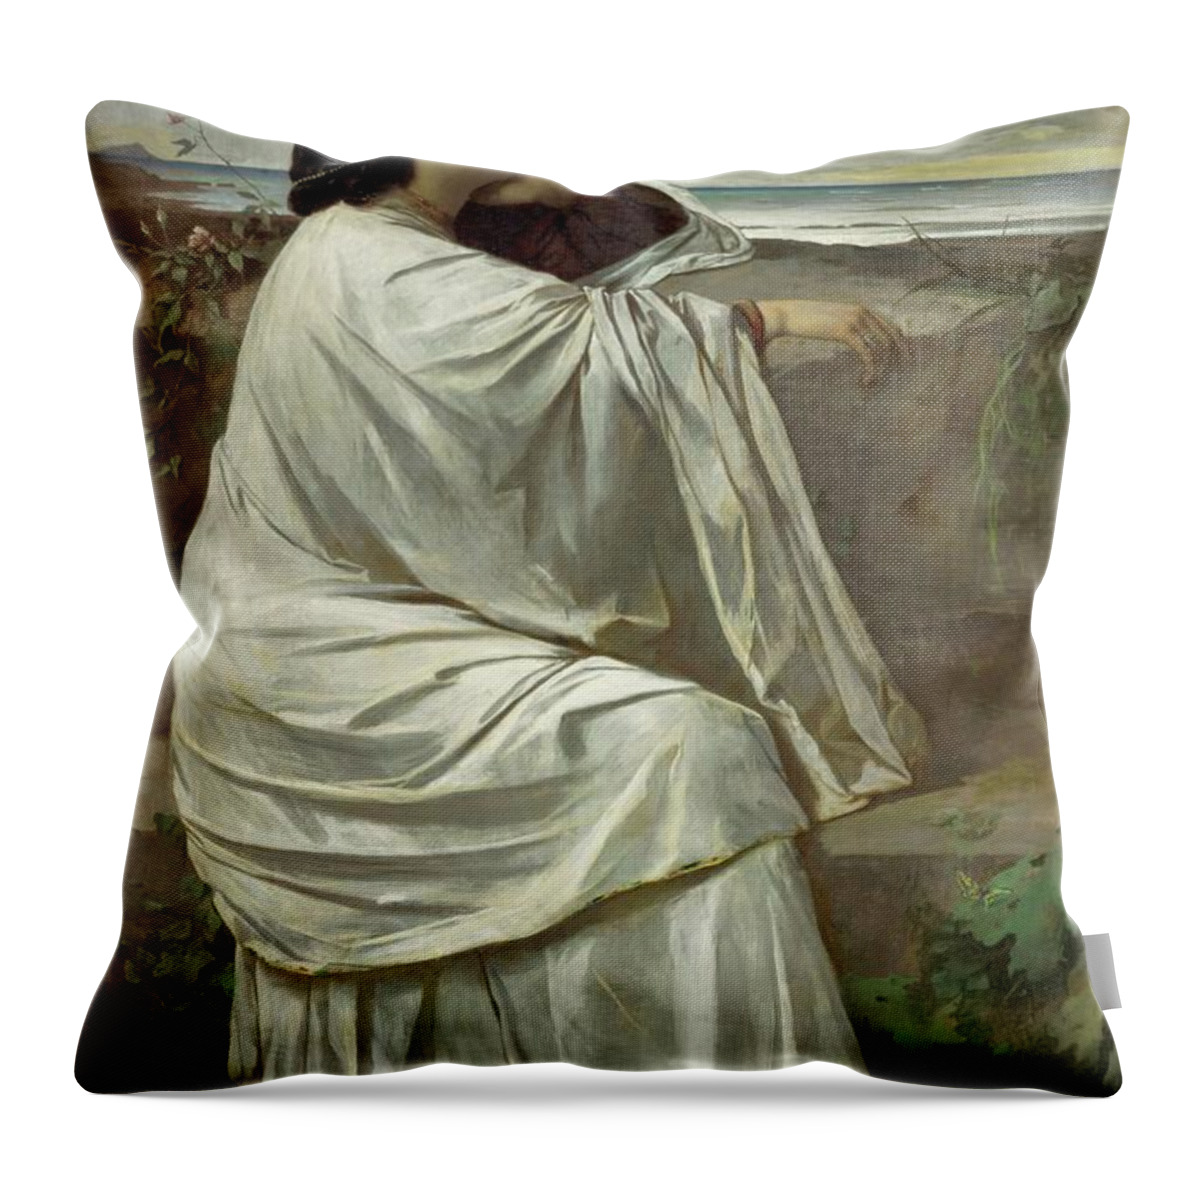 Anselm Feuerbach Throw Pillow featuring the painting Iphigenia, Feuerbach's favourite Roman model andquot, Nanaandquot,. Oil on canvas -1871-. by Anselm Feuerbach